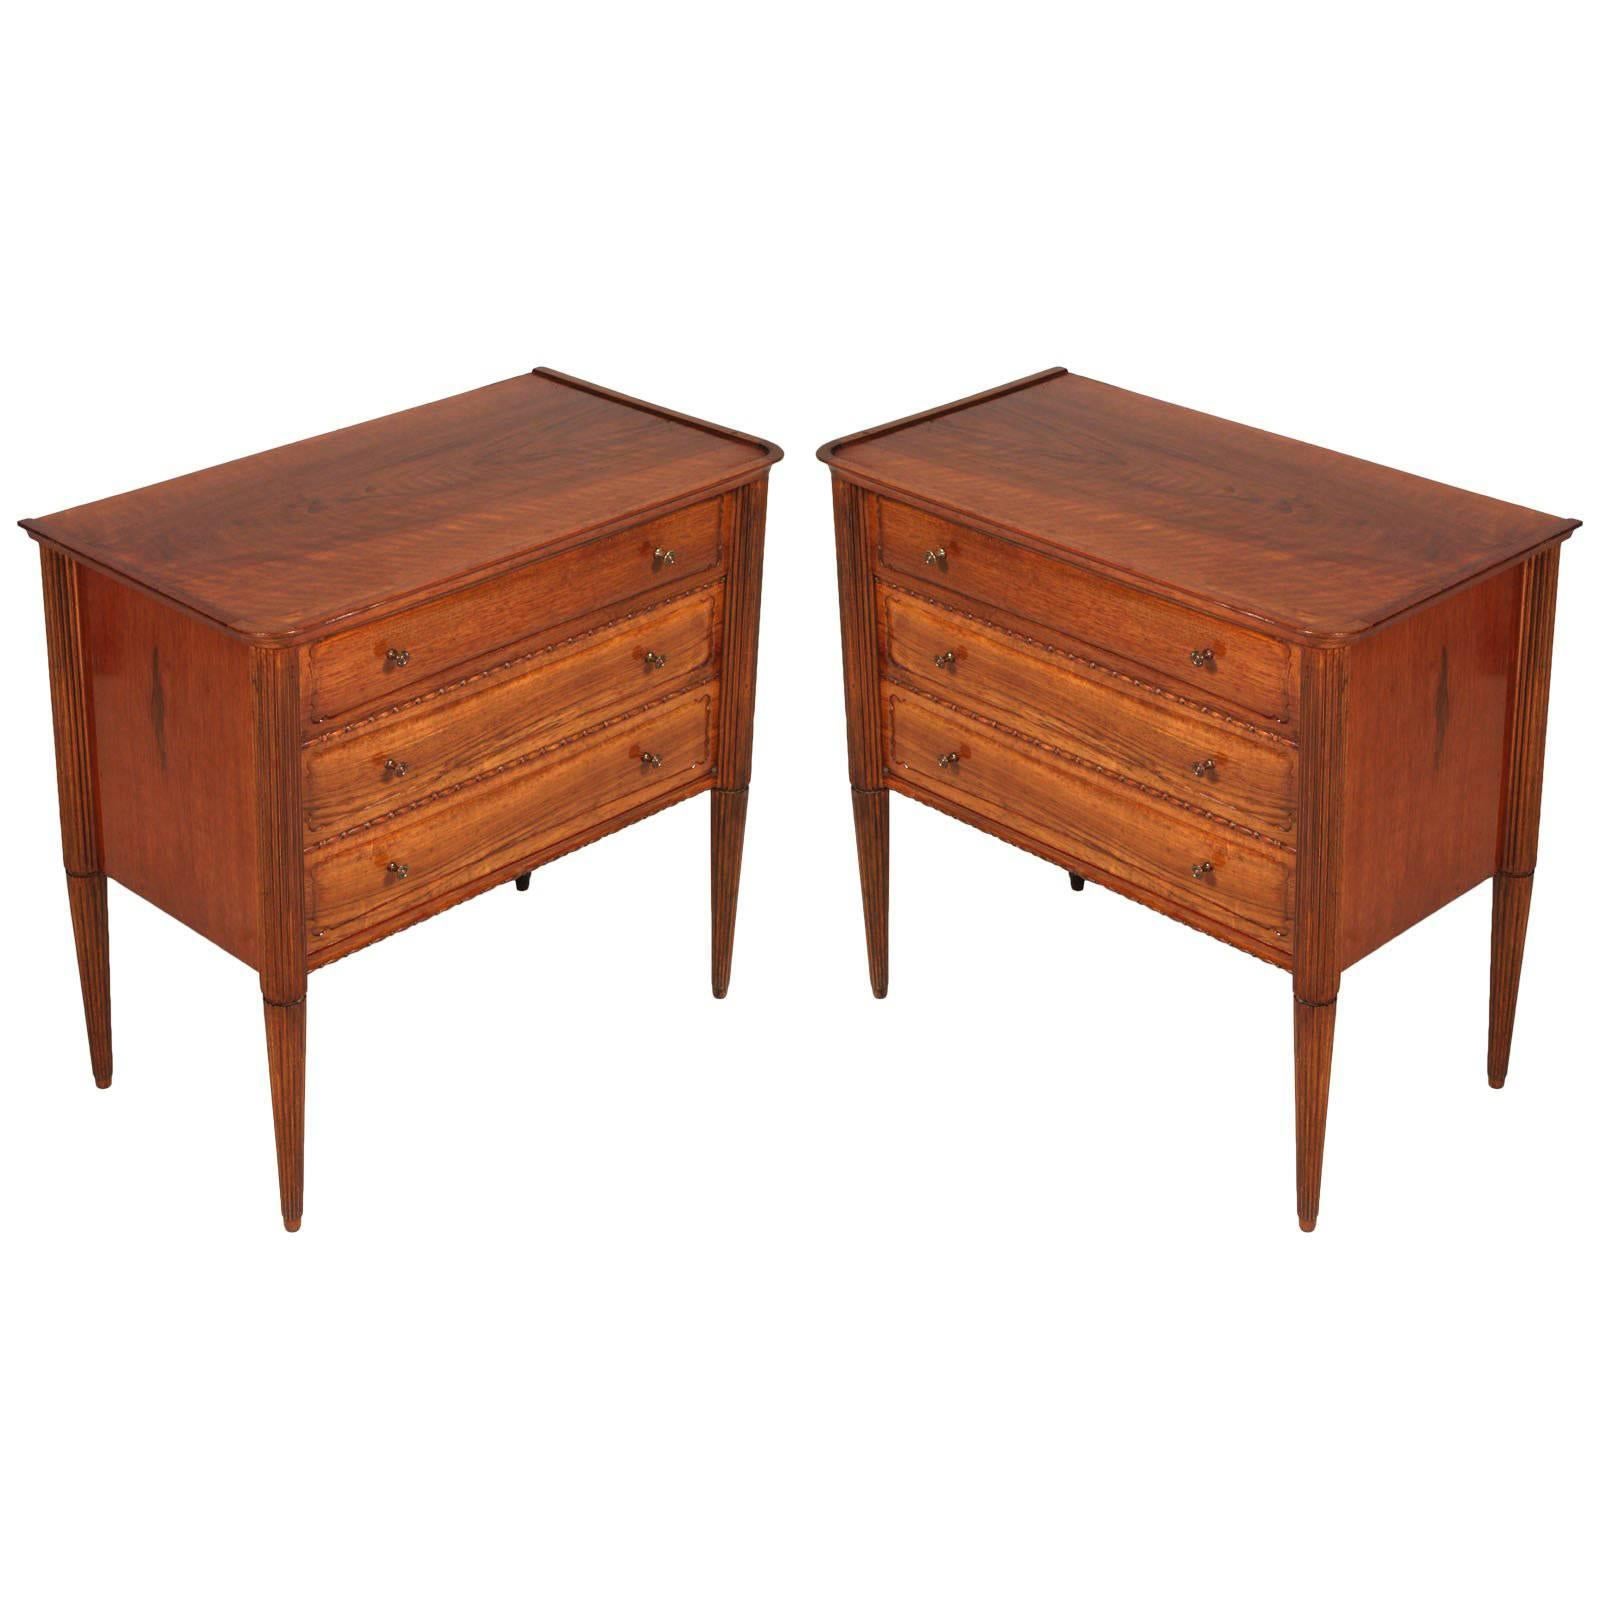 Pair of Italy Bedside Cabinet Nightstands Midcentury Modern Vittorio Dassi Style